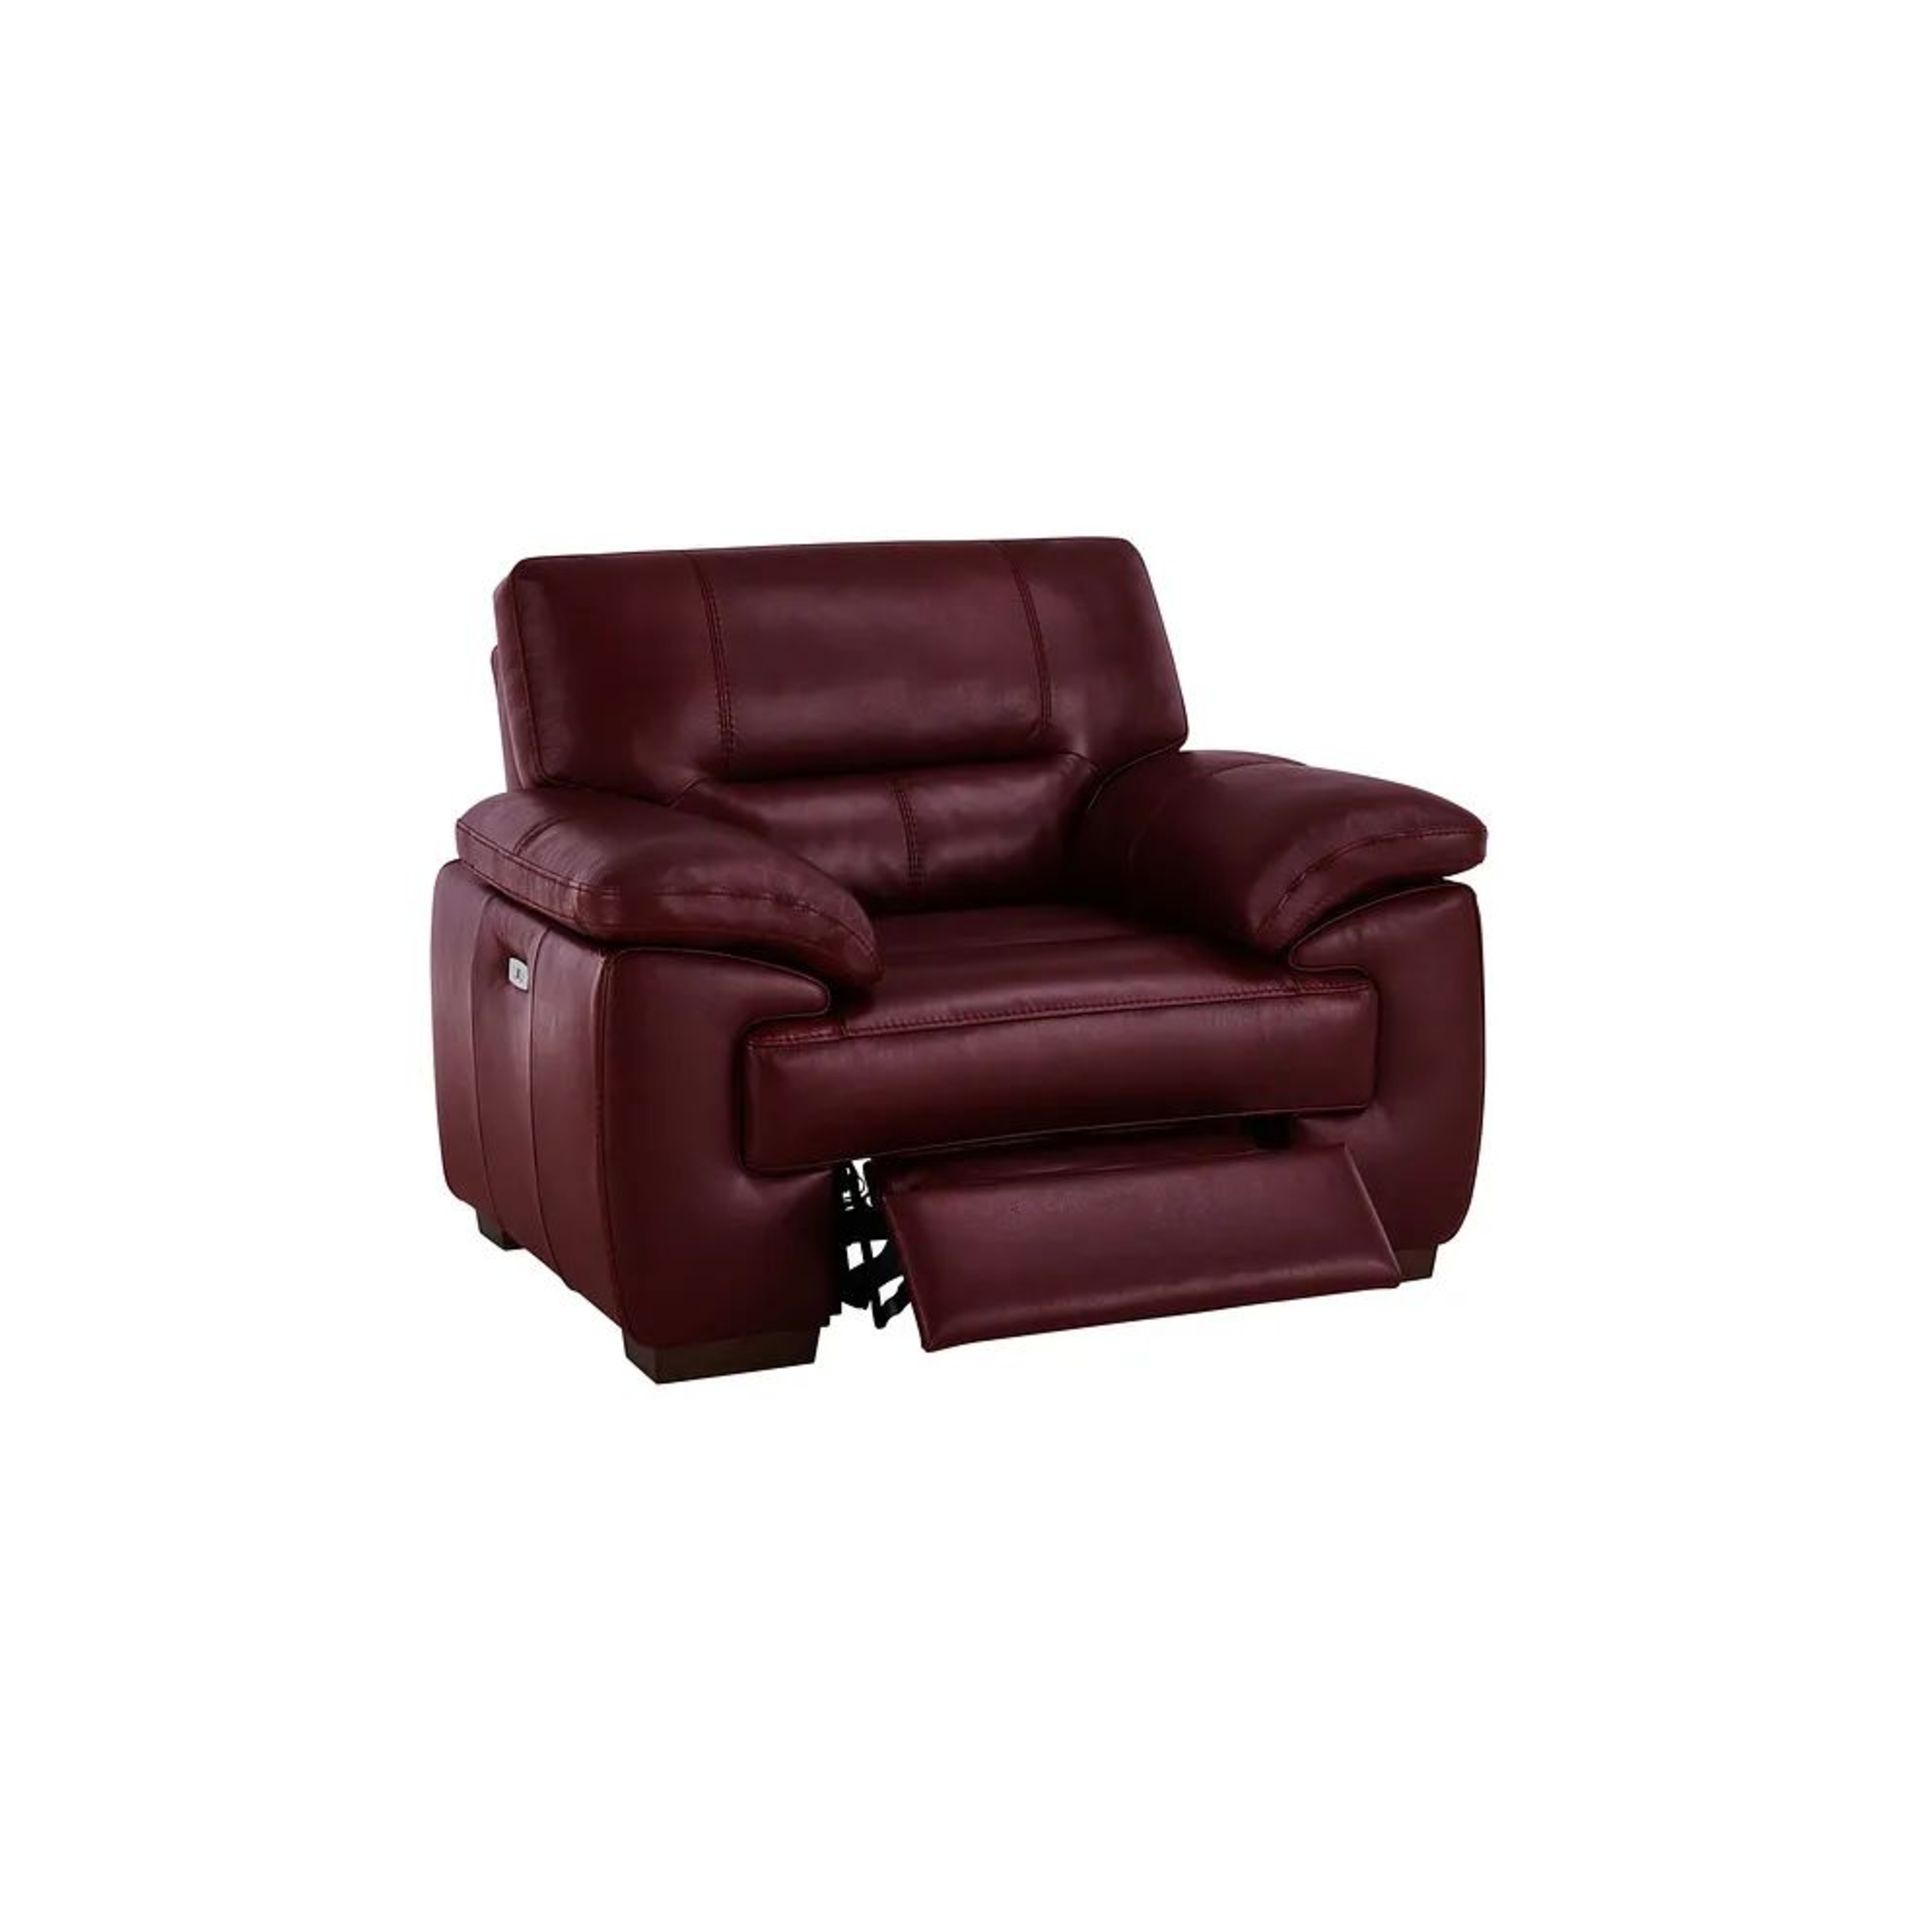 BRAND NEW ARLINGTON Electric Recliner Armchair - BURGANDY LEATHER. RRP £1199. Create a traditional - Image 3 of 12